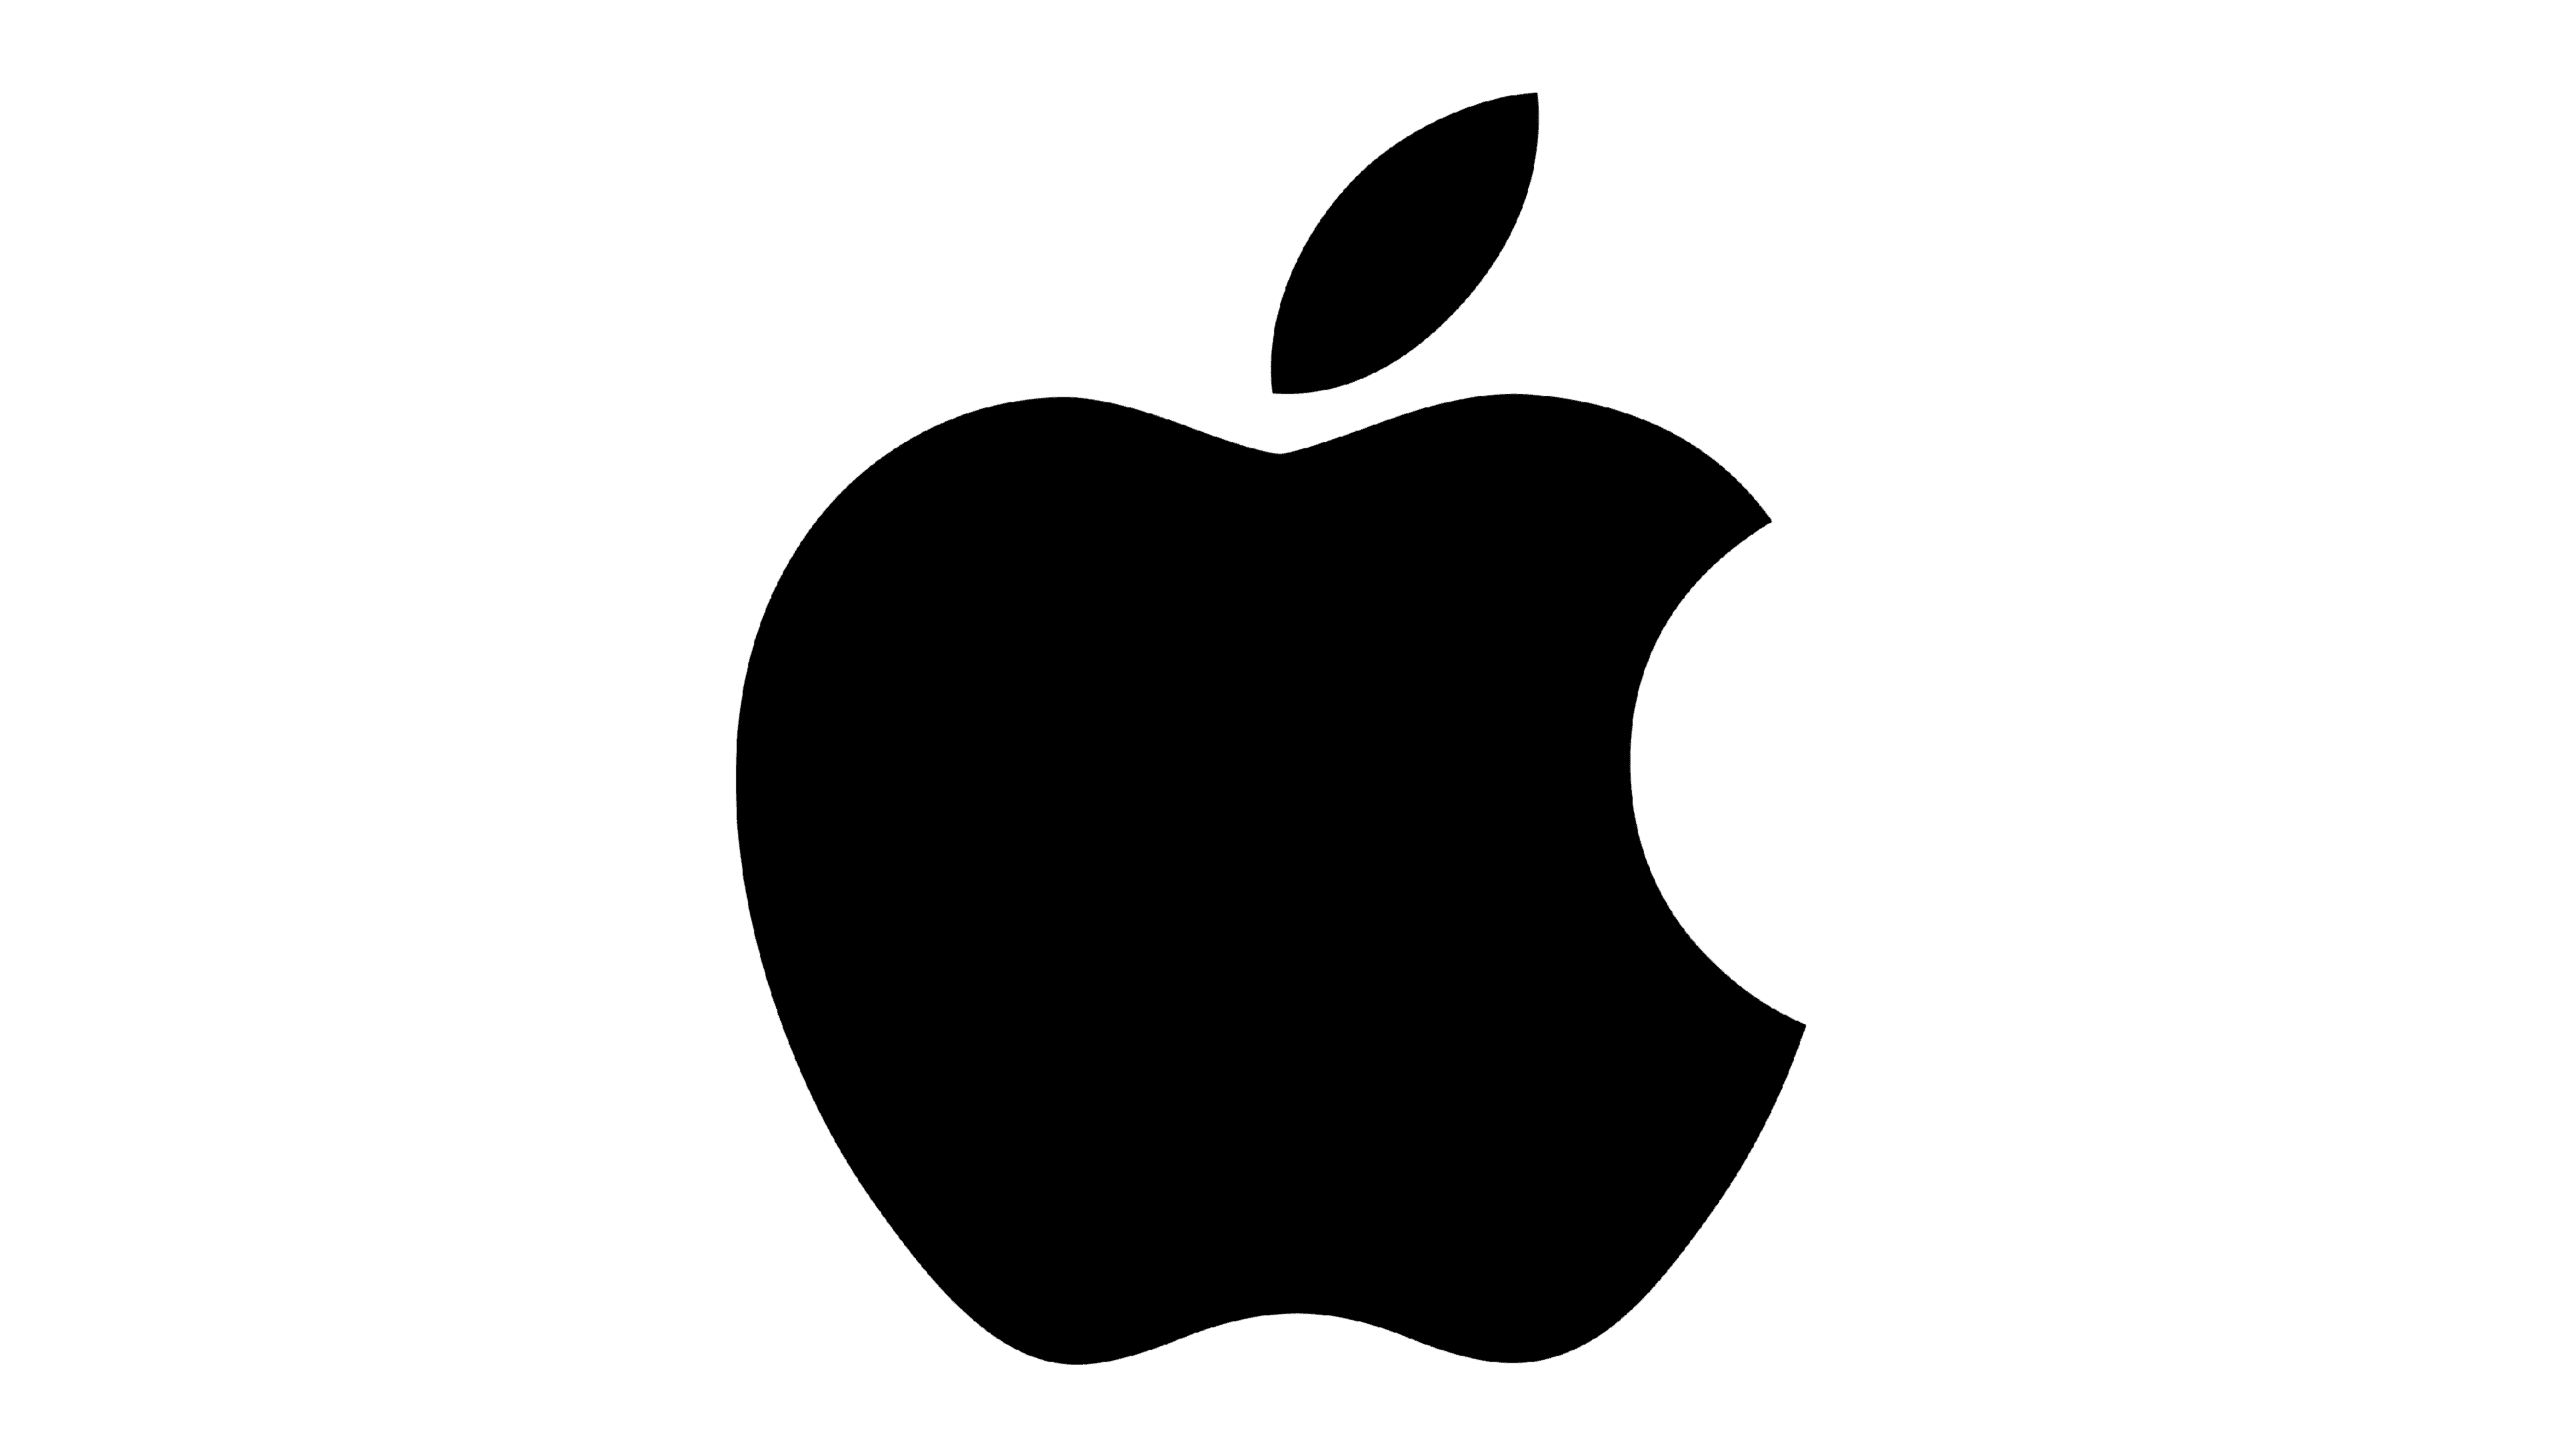 Apple Accessories and gadgets store in pakistan - typeshop